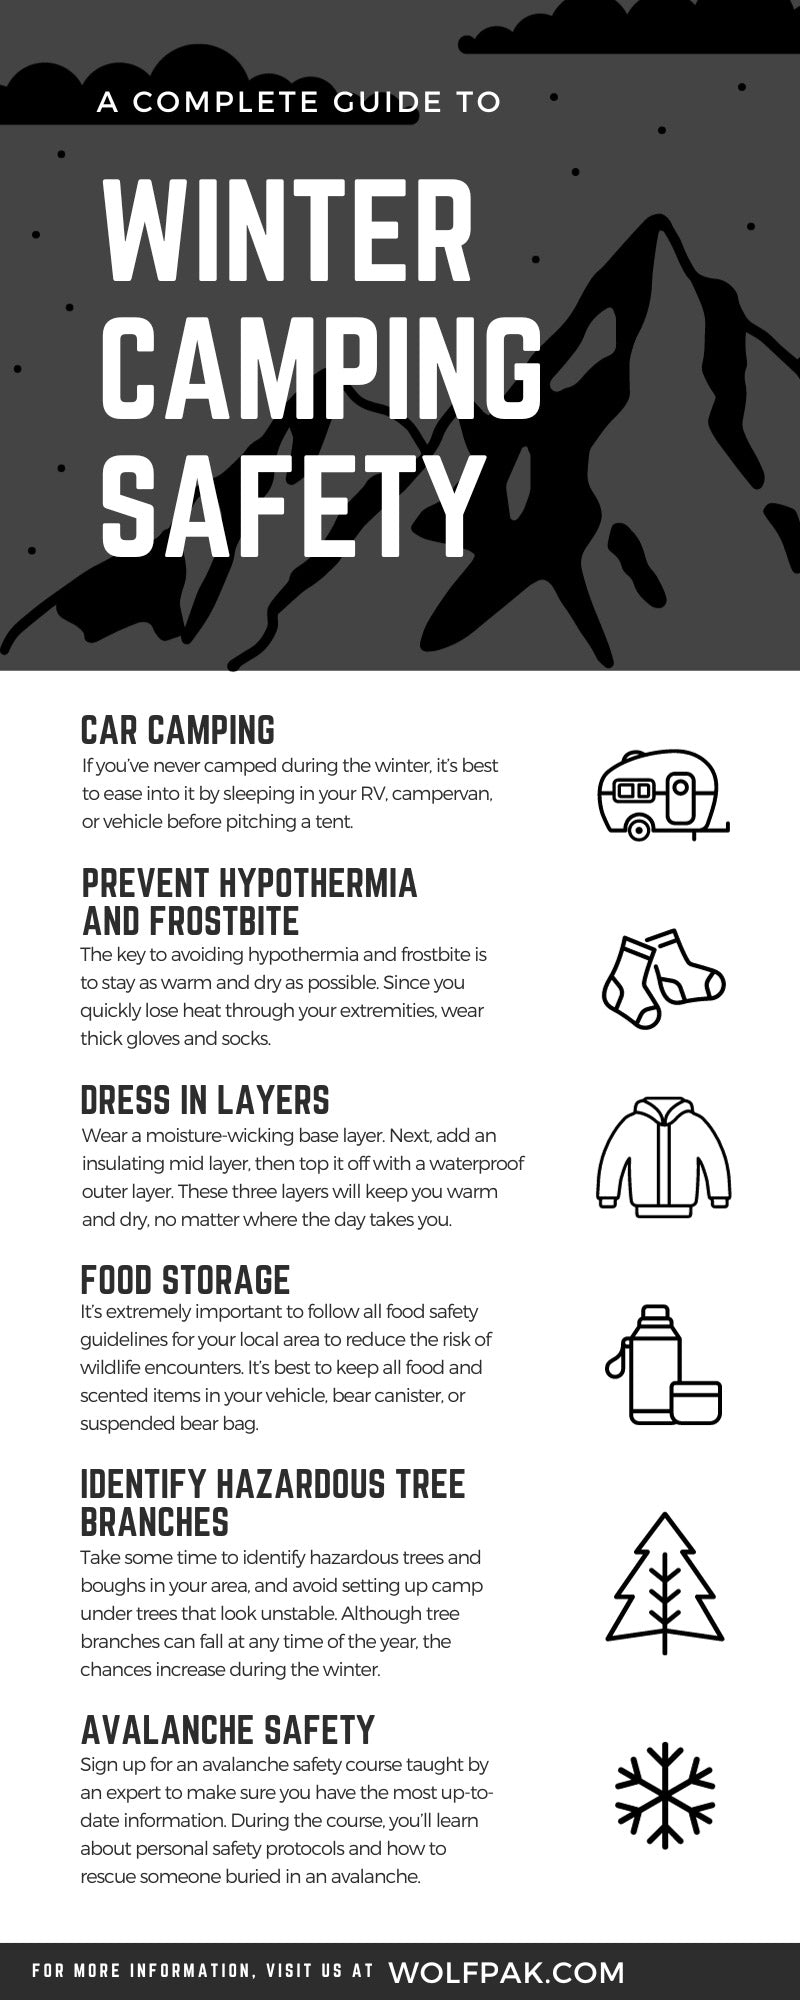 A Complete Guide to Winter Camping Safety